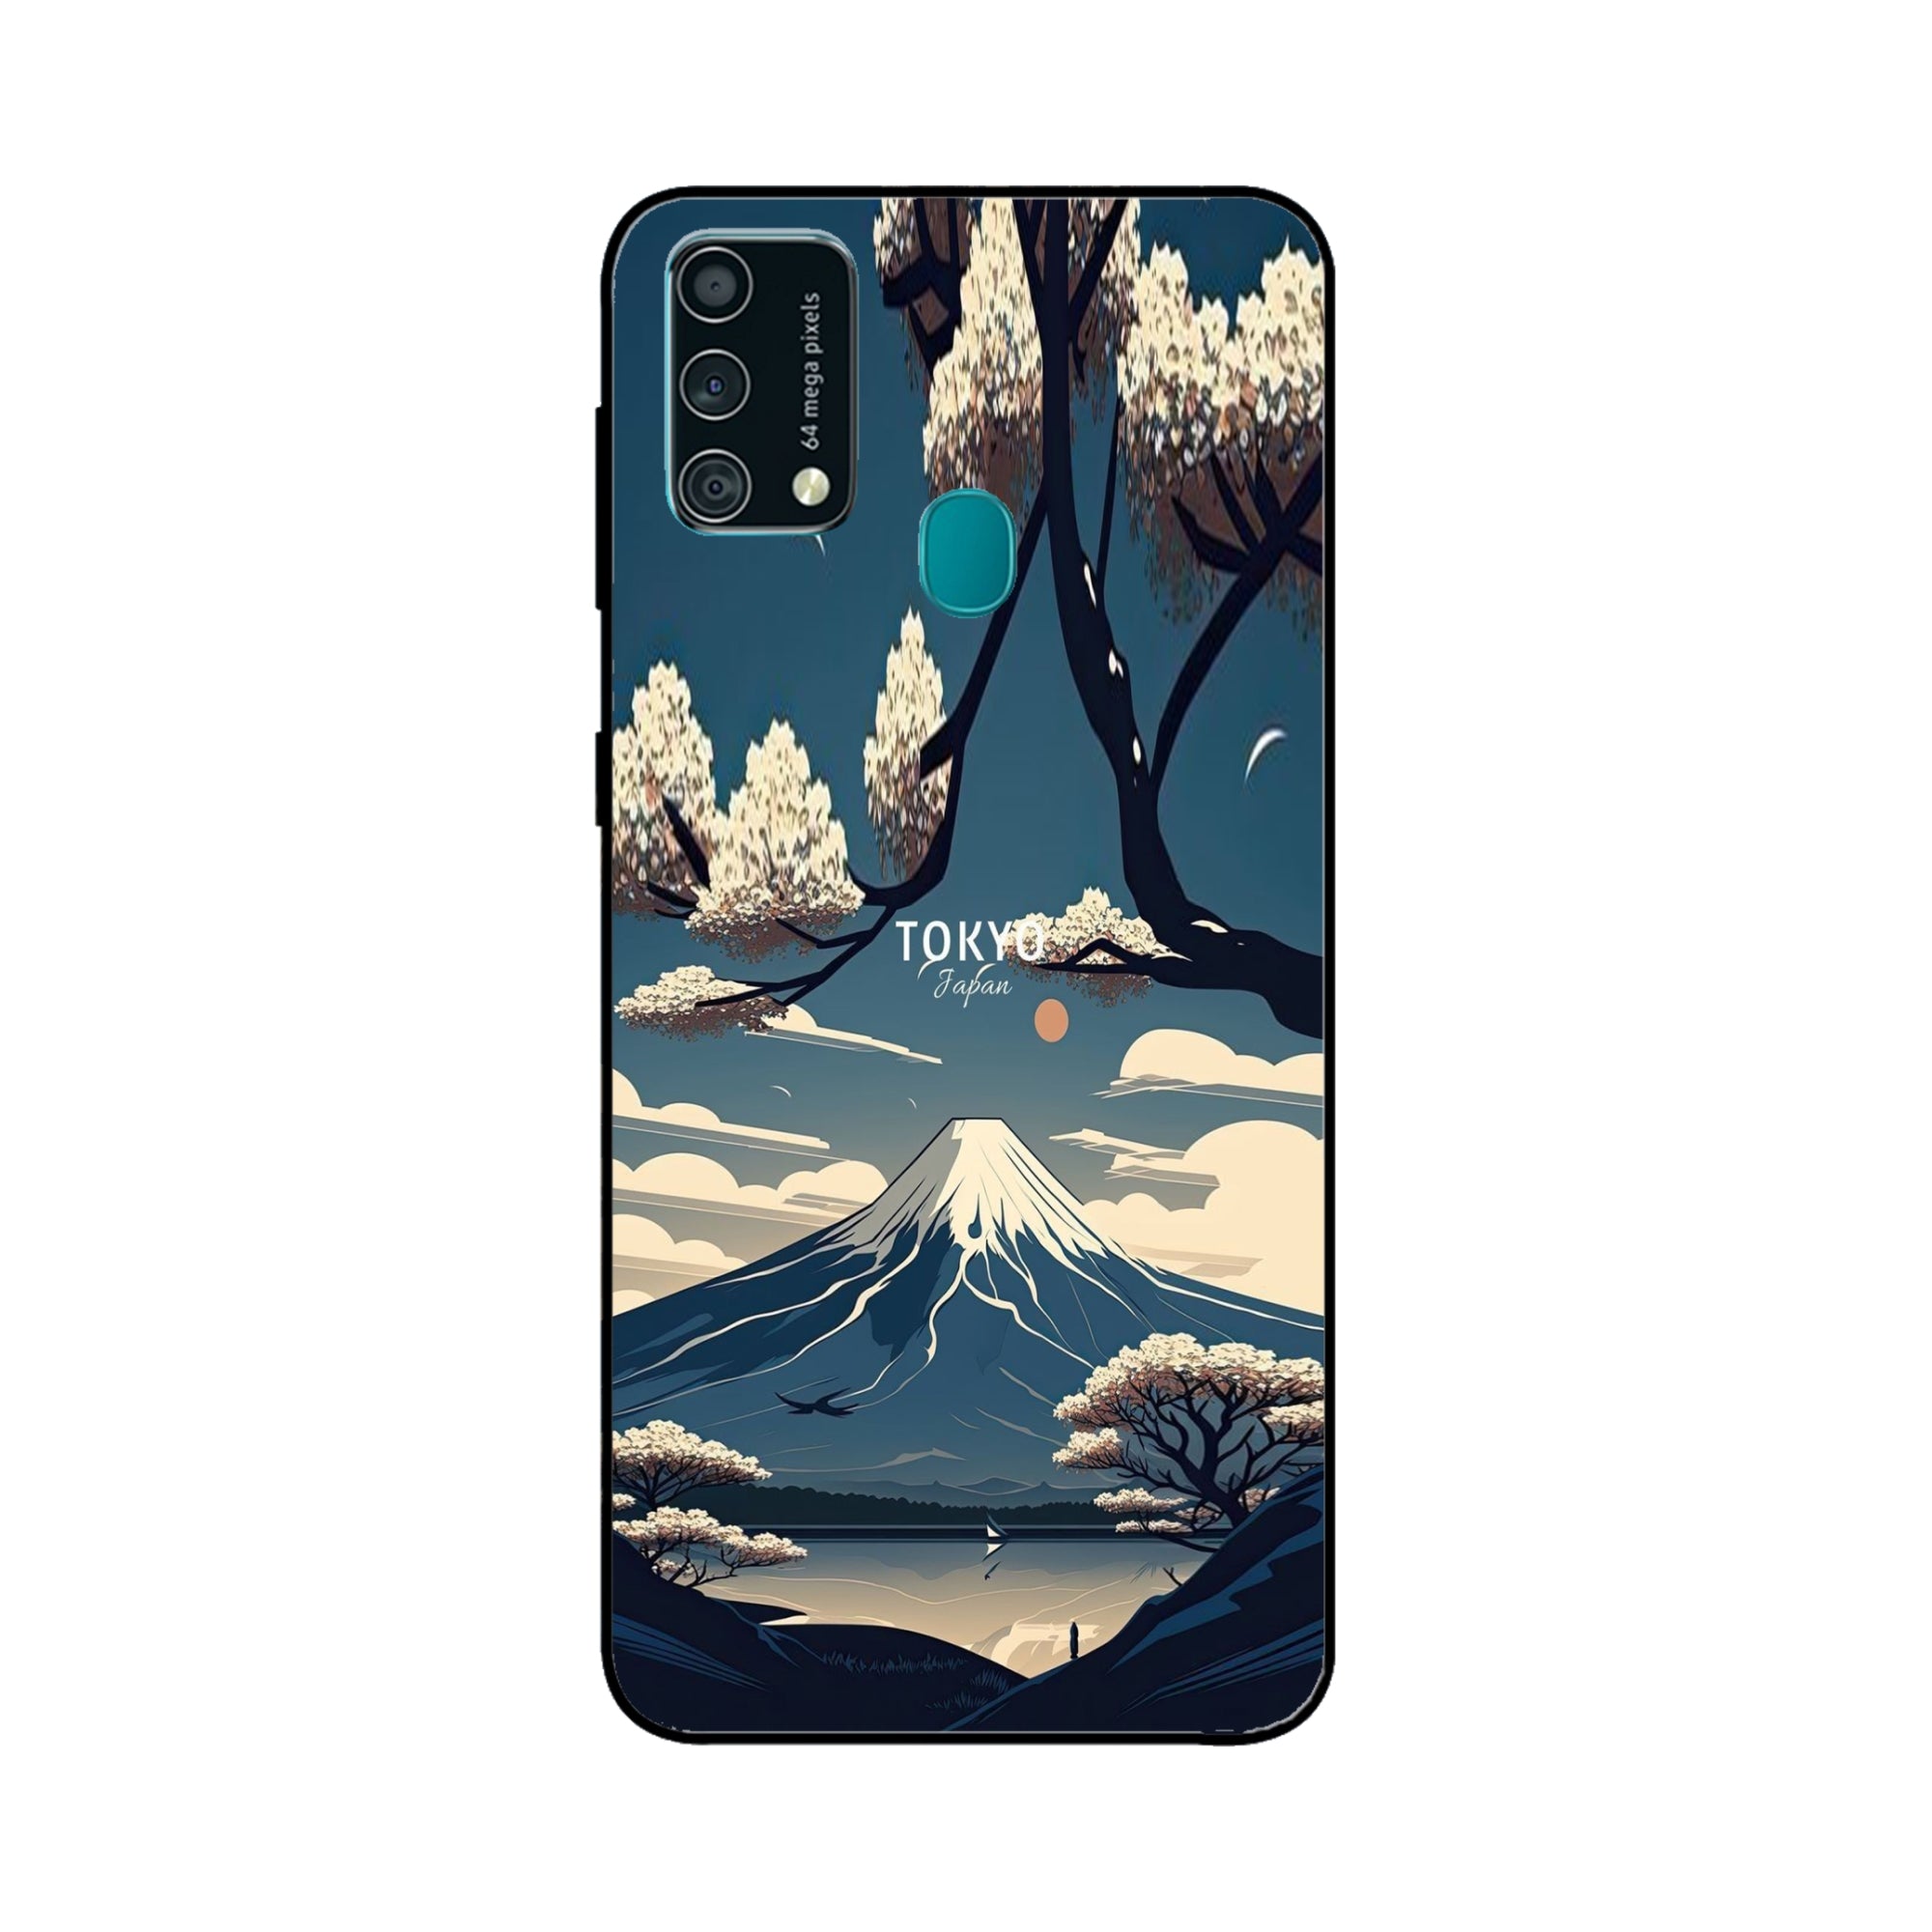 Buy Tokyo Metal-Silicon Back Mobile Phone Case/Cover For Samsung Galaxy F41 Online